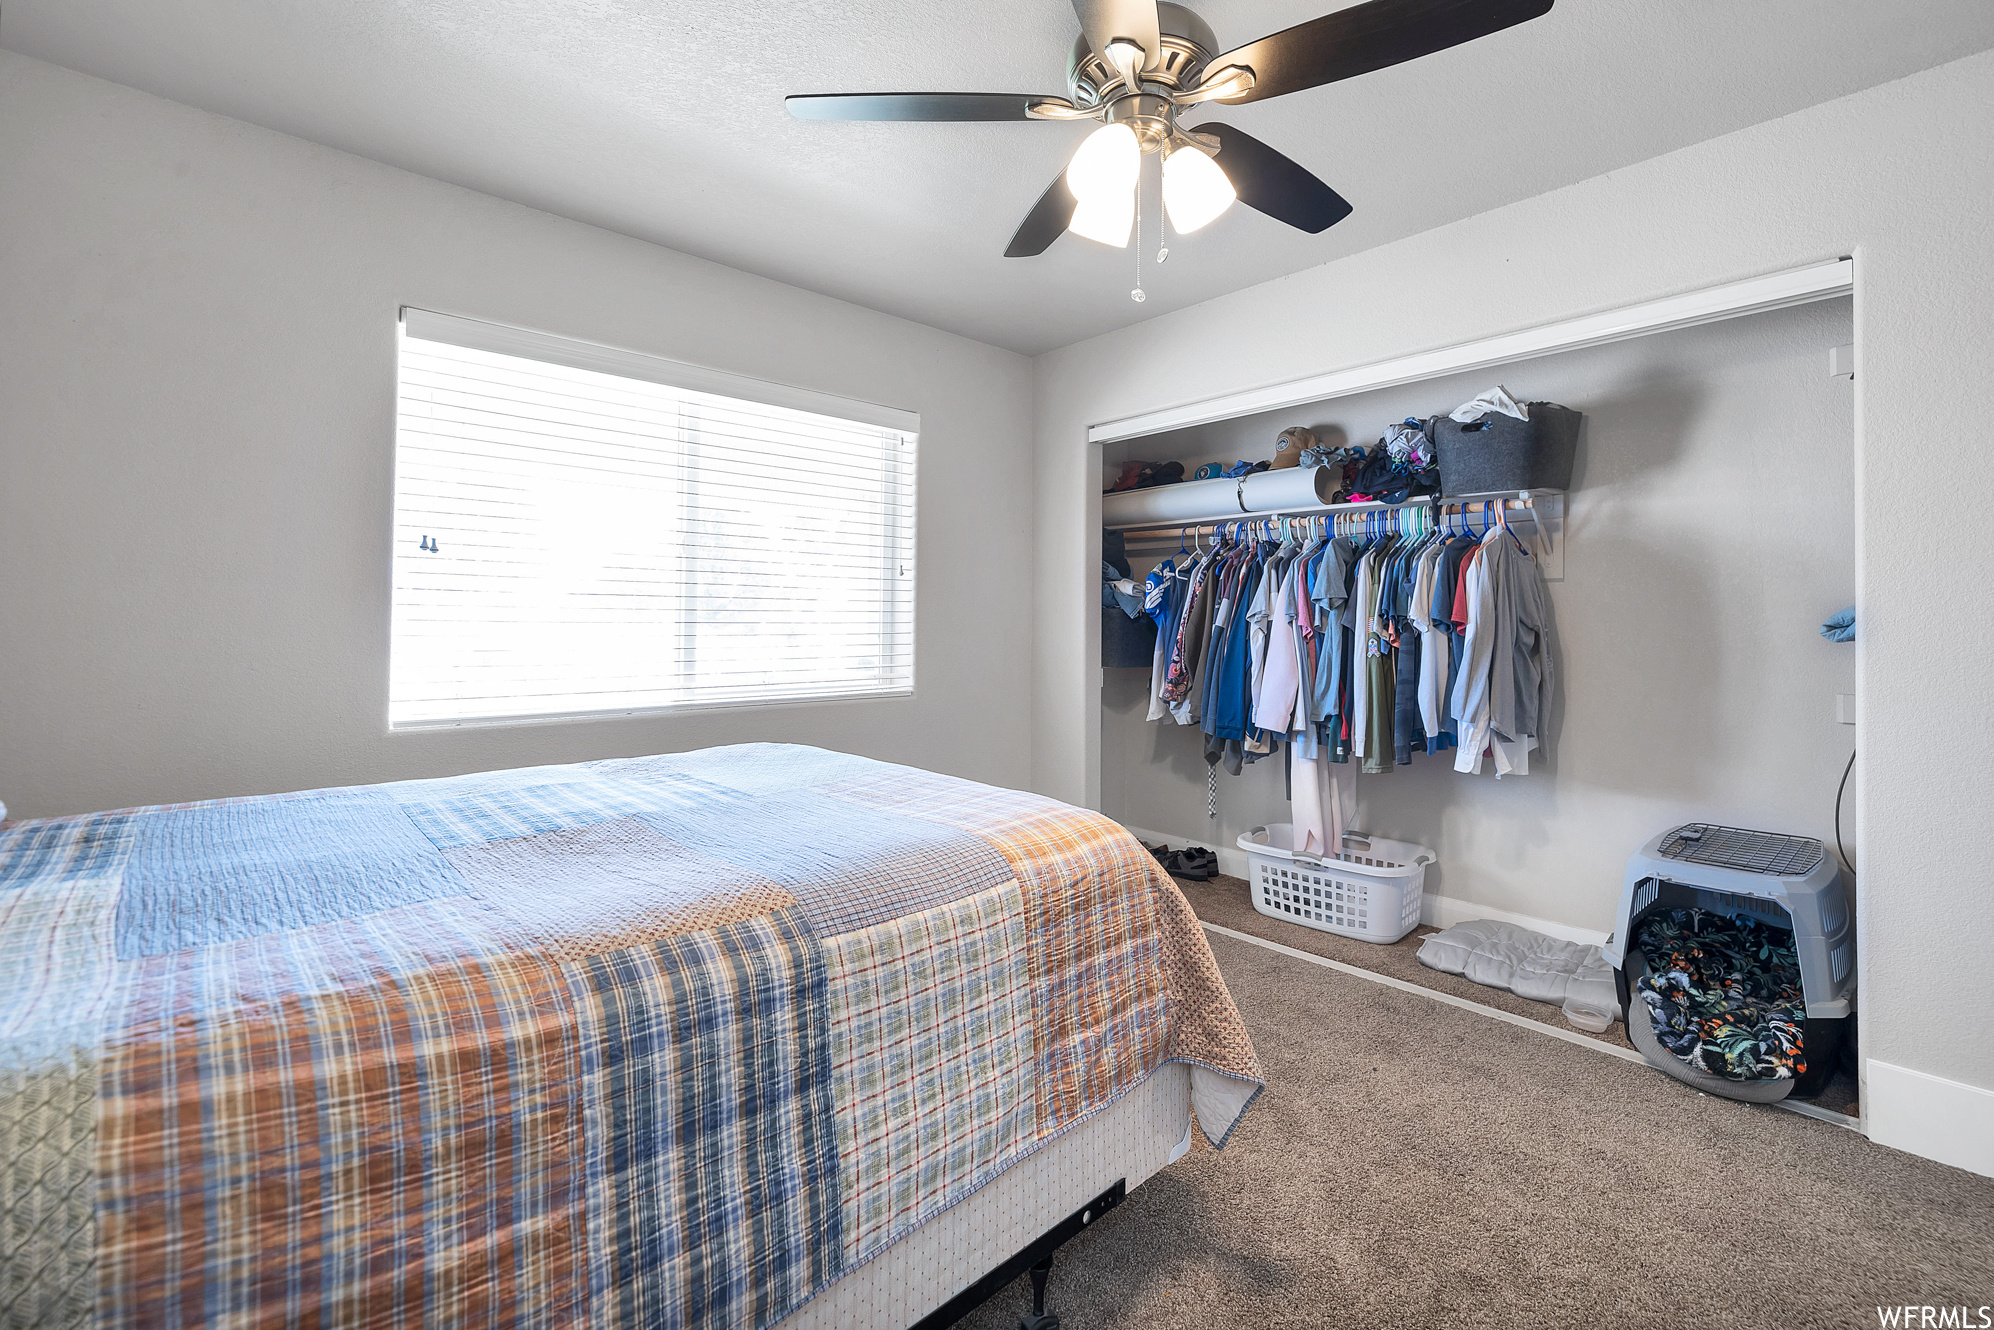 Bedroom with natural light, a ceiling fan, and carpet